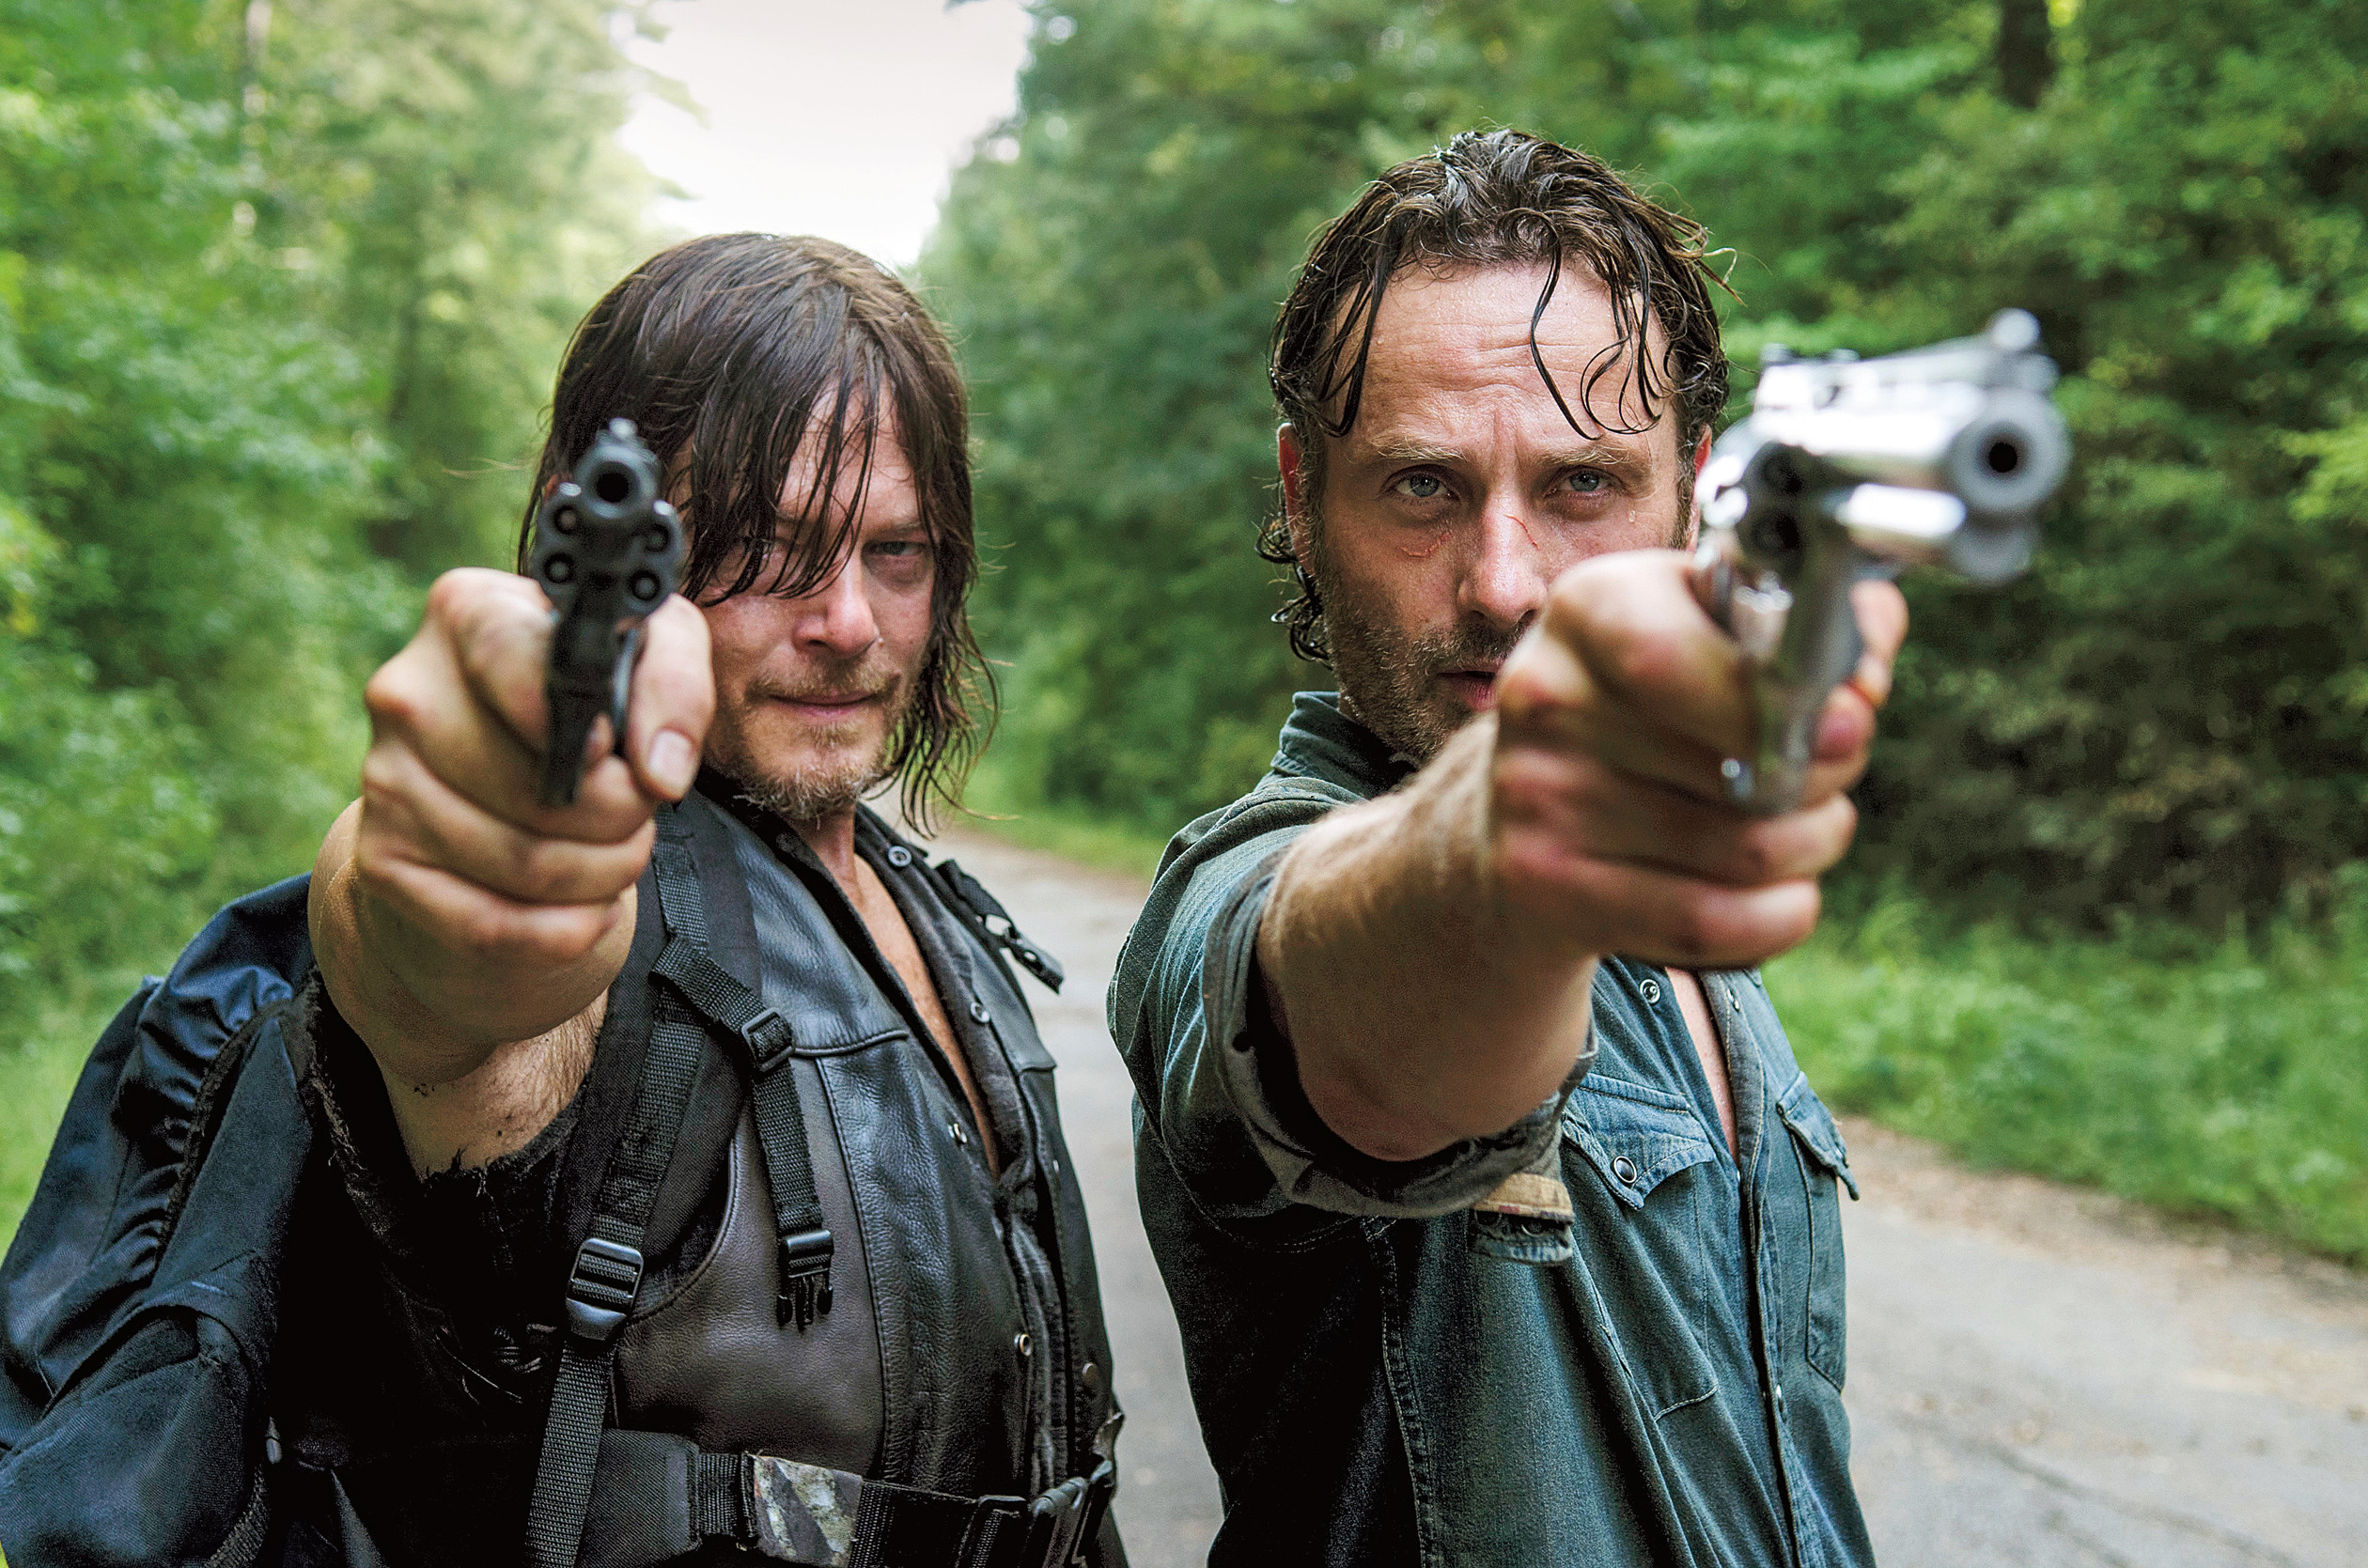 2520x1669 The Walking Dead Season 6 Returns: More Danger, More Daryl and a  Behind-the-Scenes Look at What's Ahead